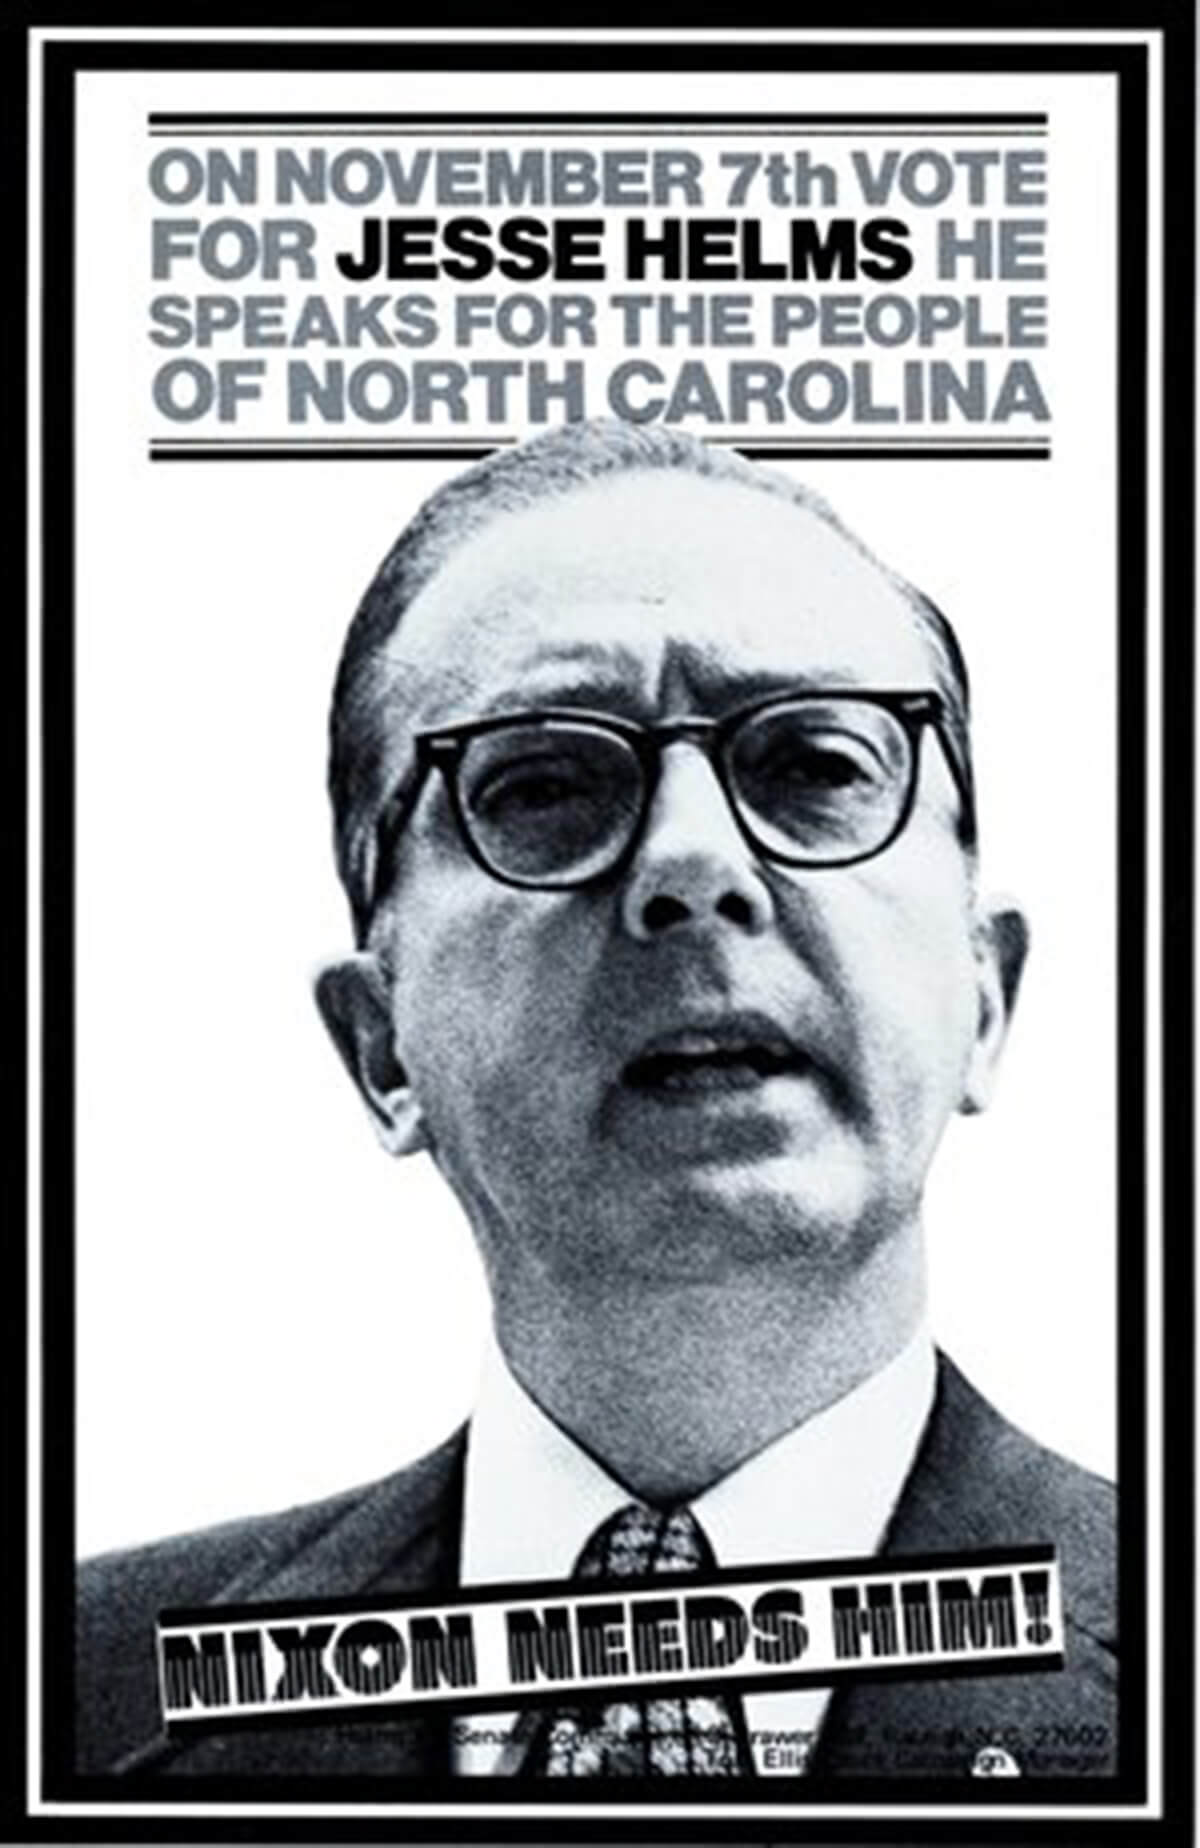 Poster from Jesse Helms' 1972 campaign.